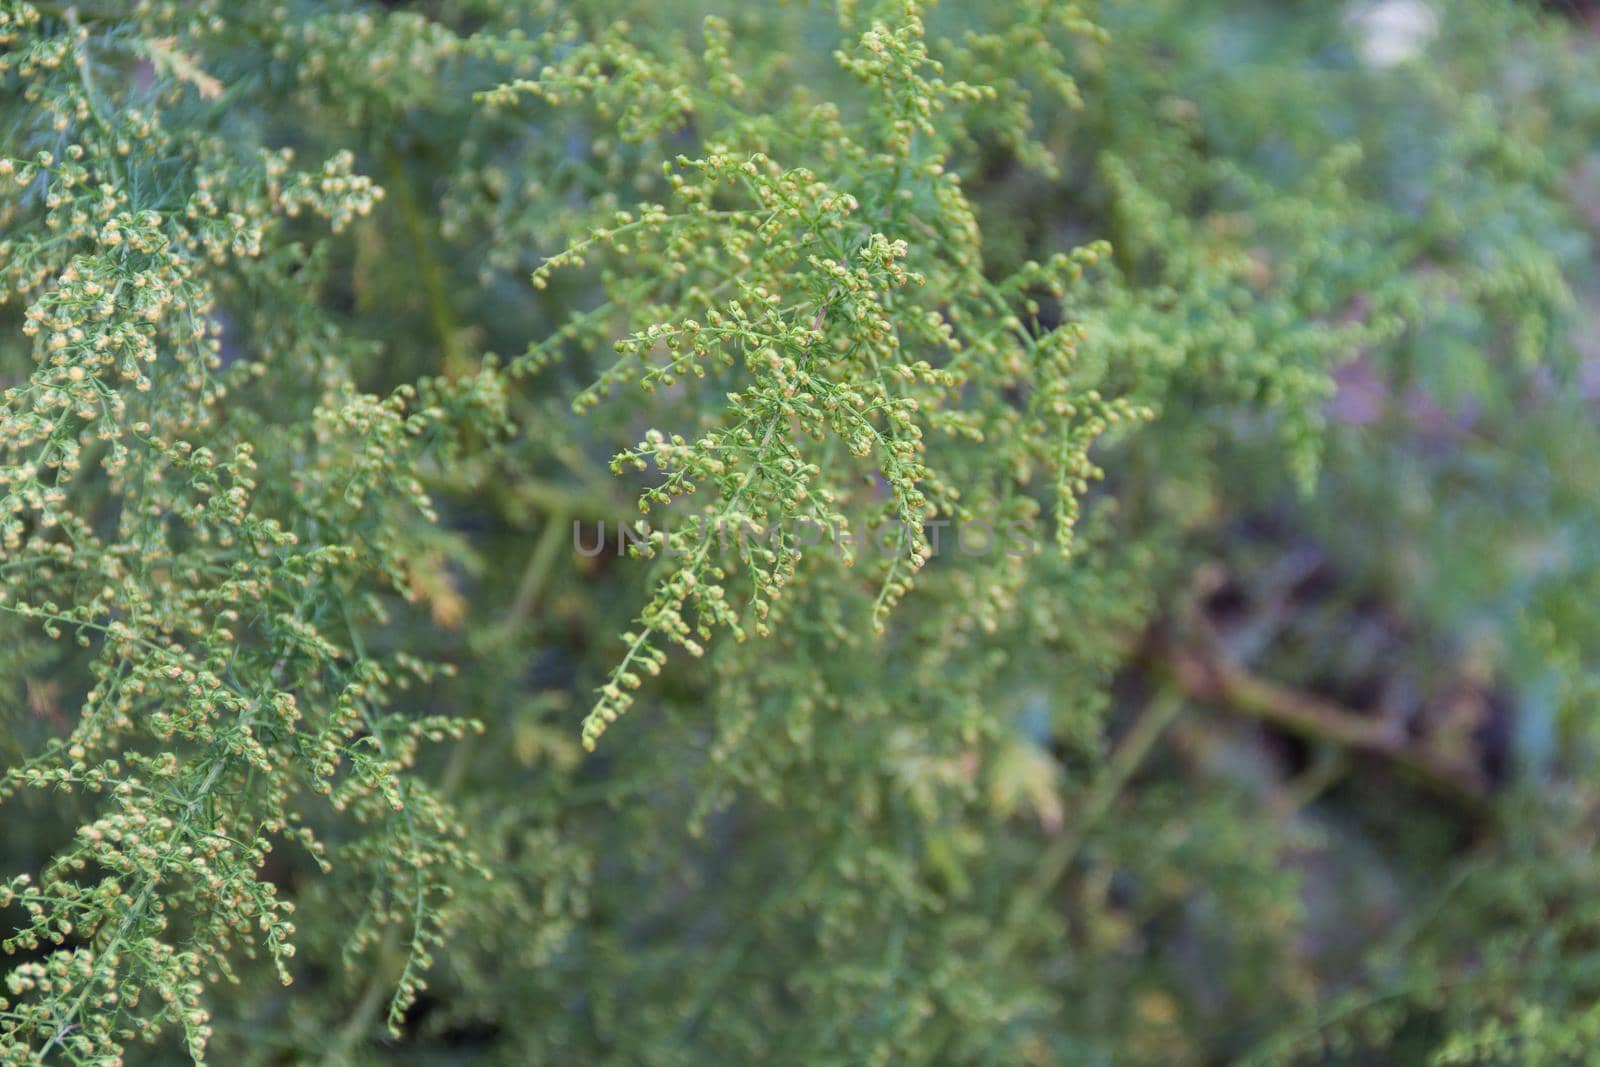 Detail of the branch of artemisia annua in bloom. Medicinal plant that grows wild in the mountains